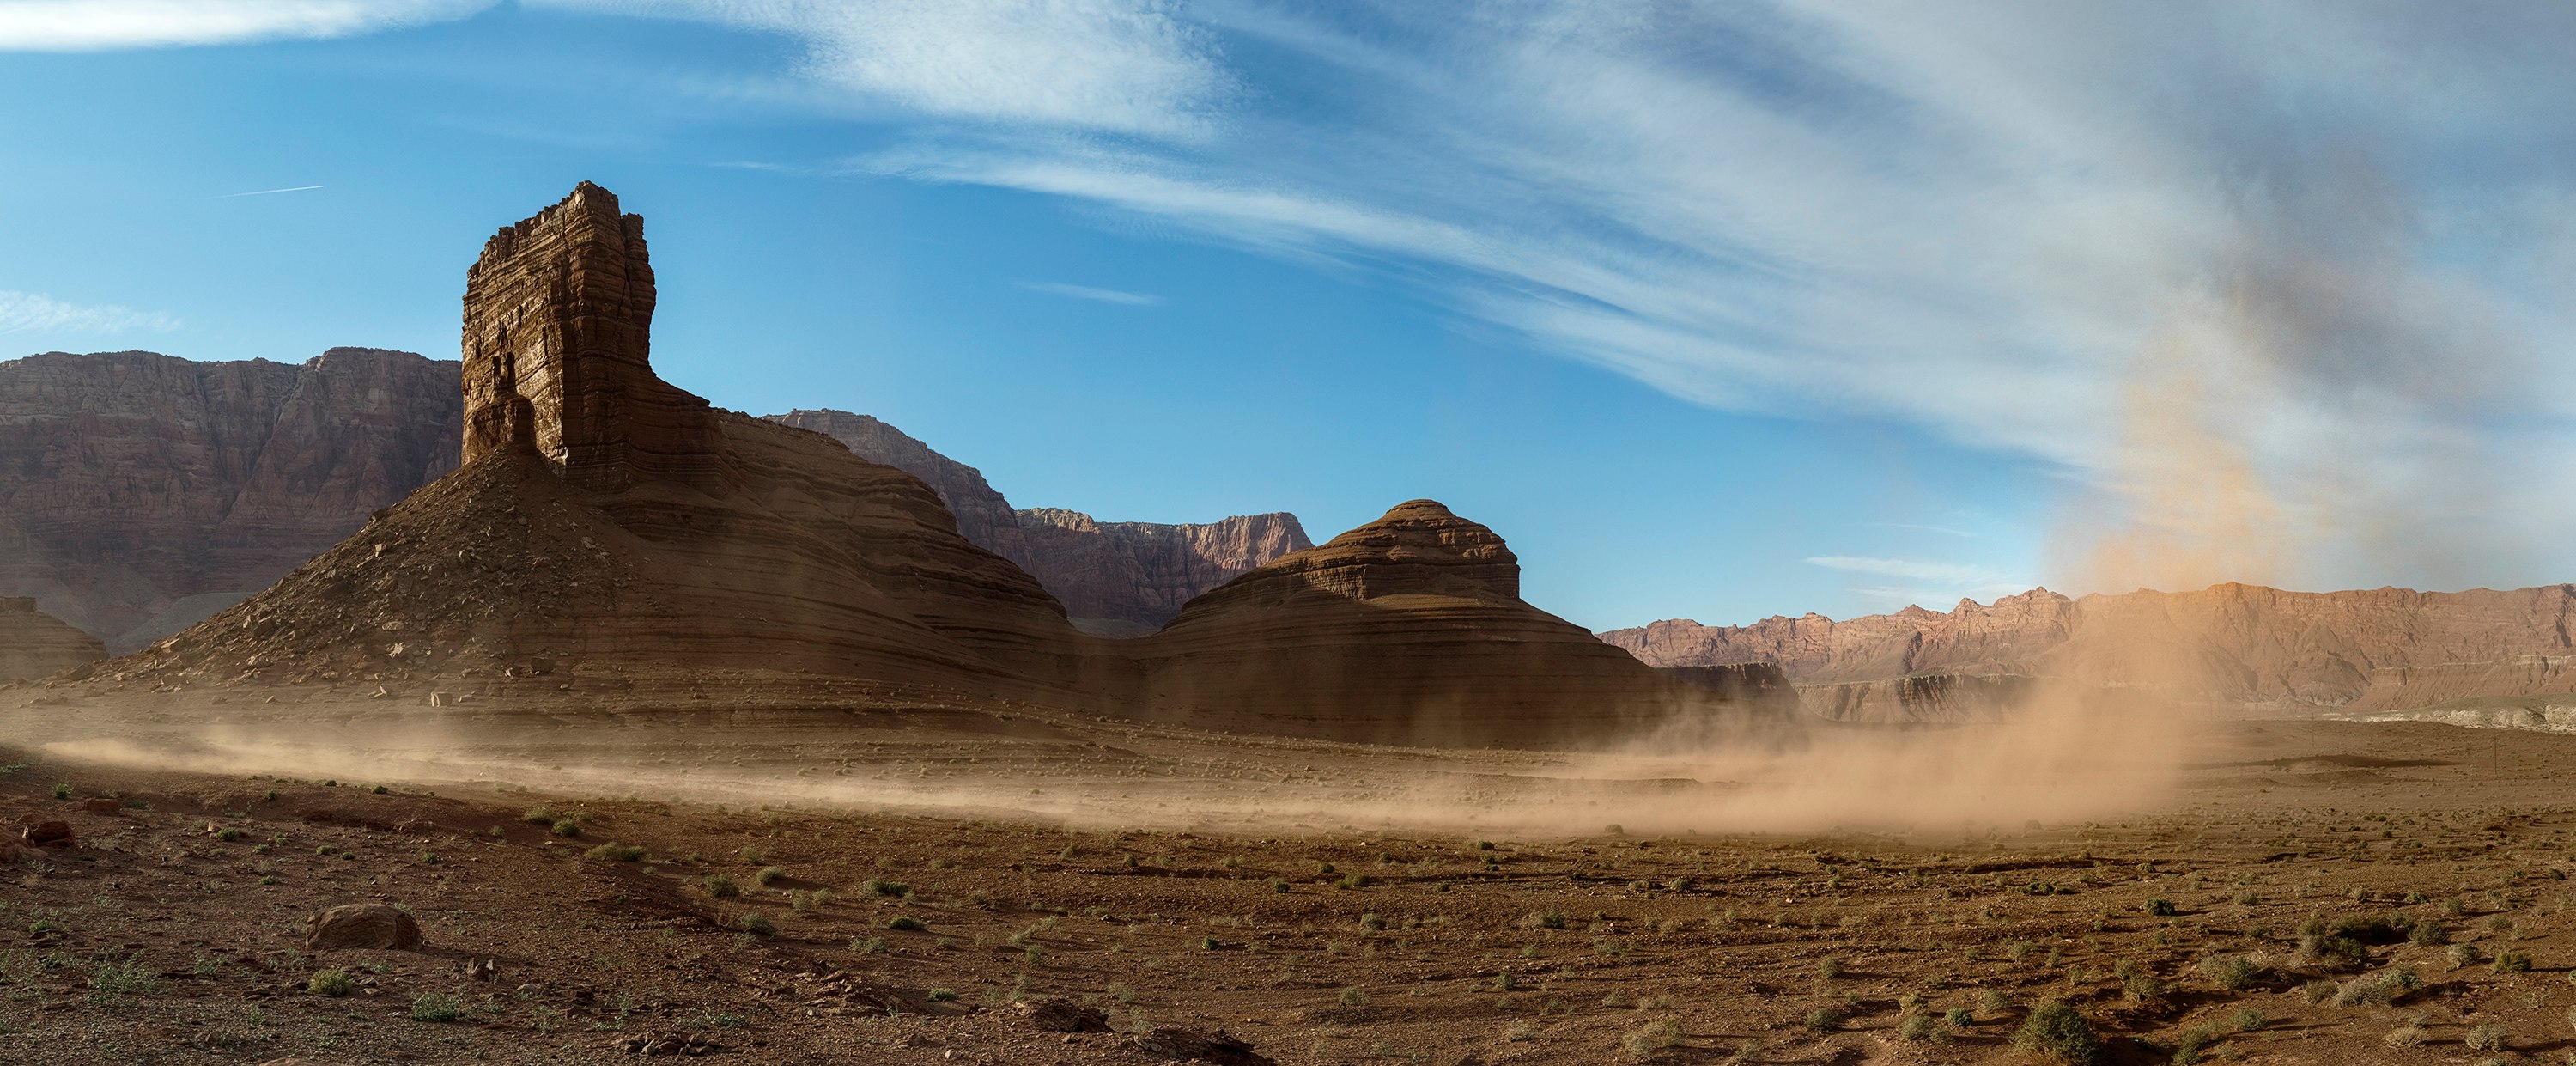 Dust Storm, Lee's Ferry, Marble Canyon, Arizona